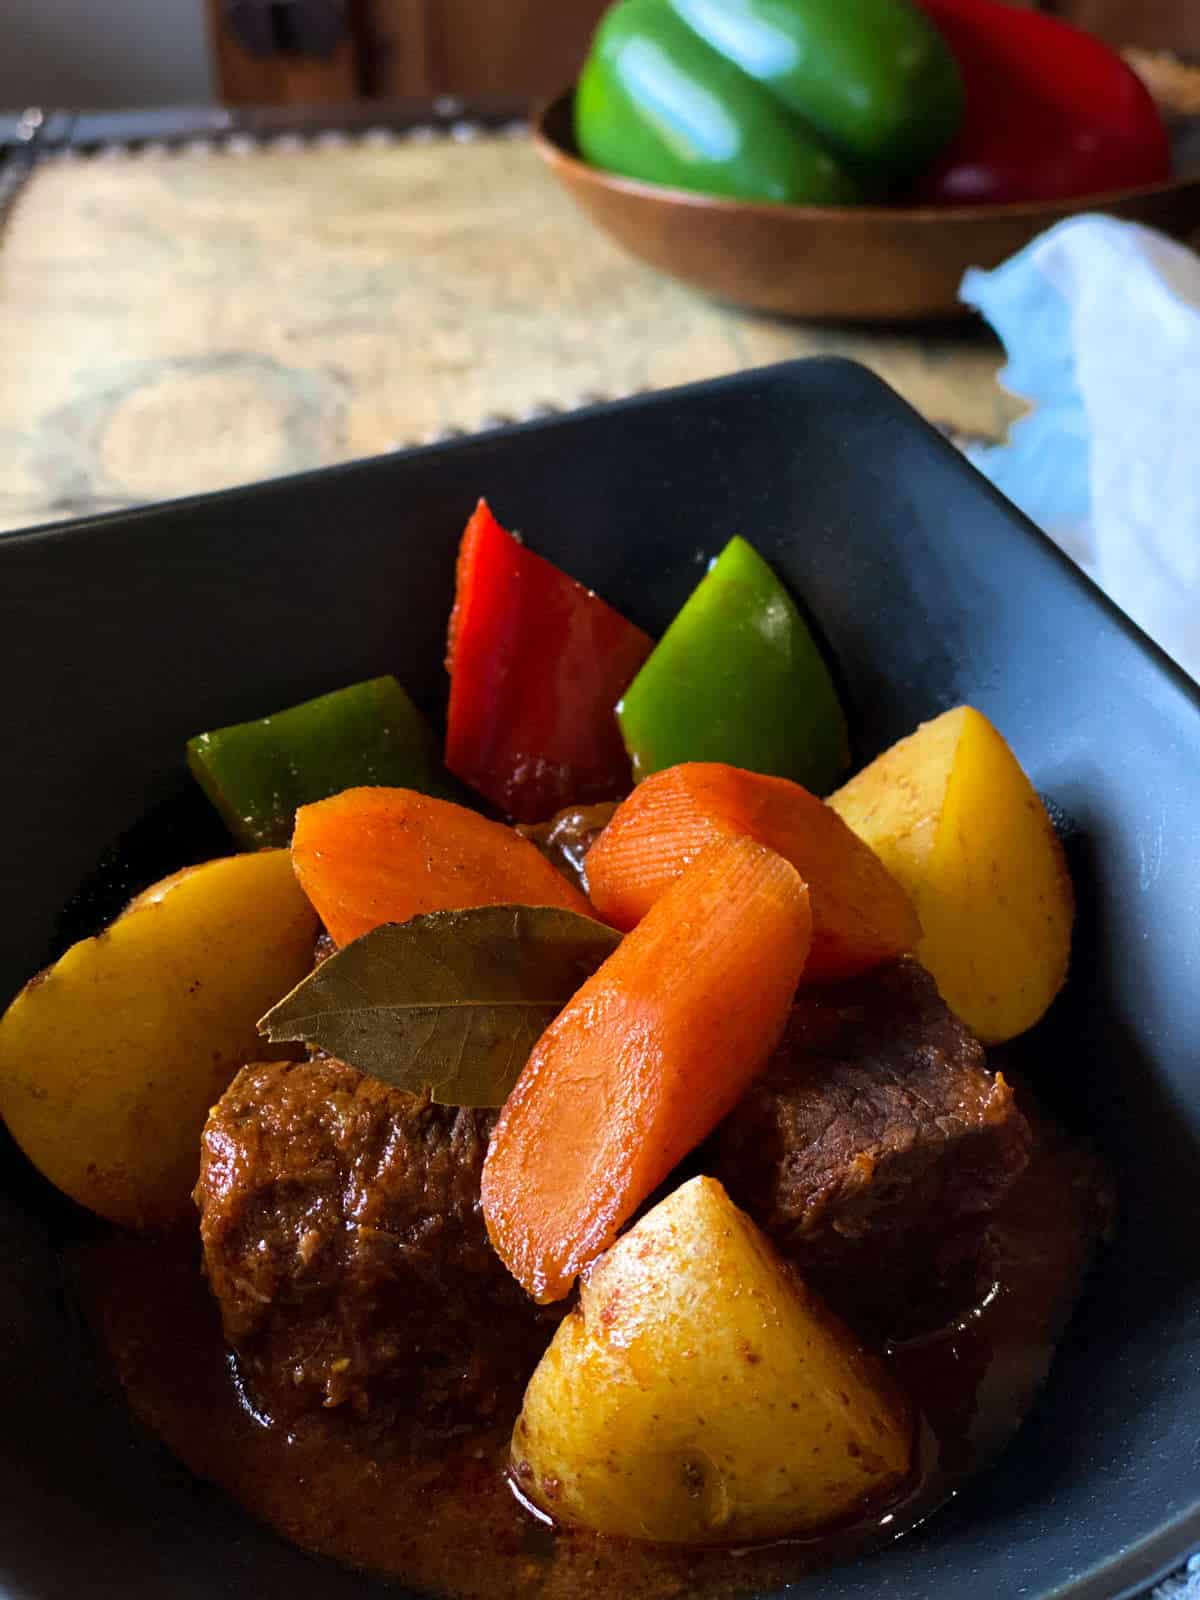 Beef with carrots, potatoes, and red and green bell peppers in a black dish.